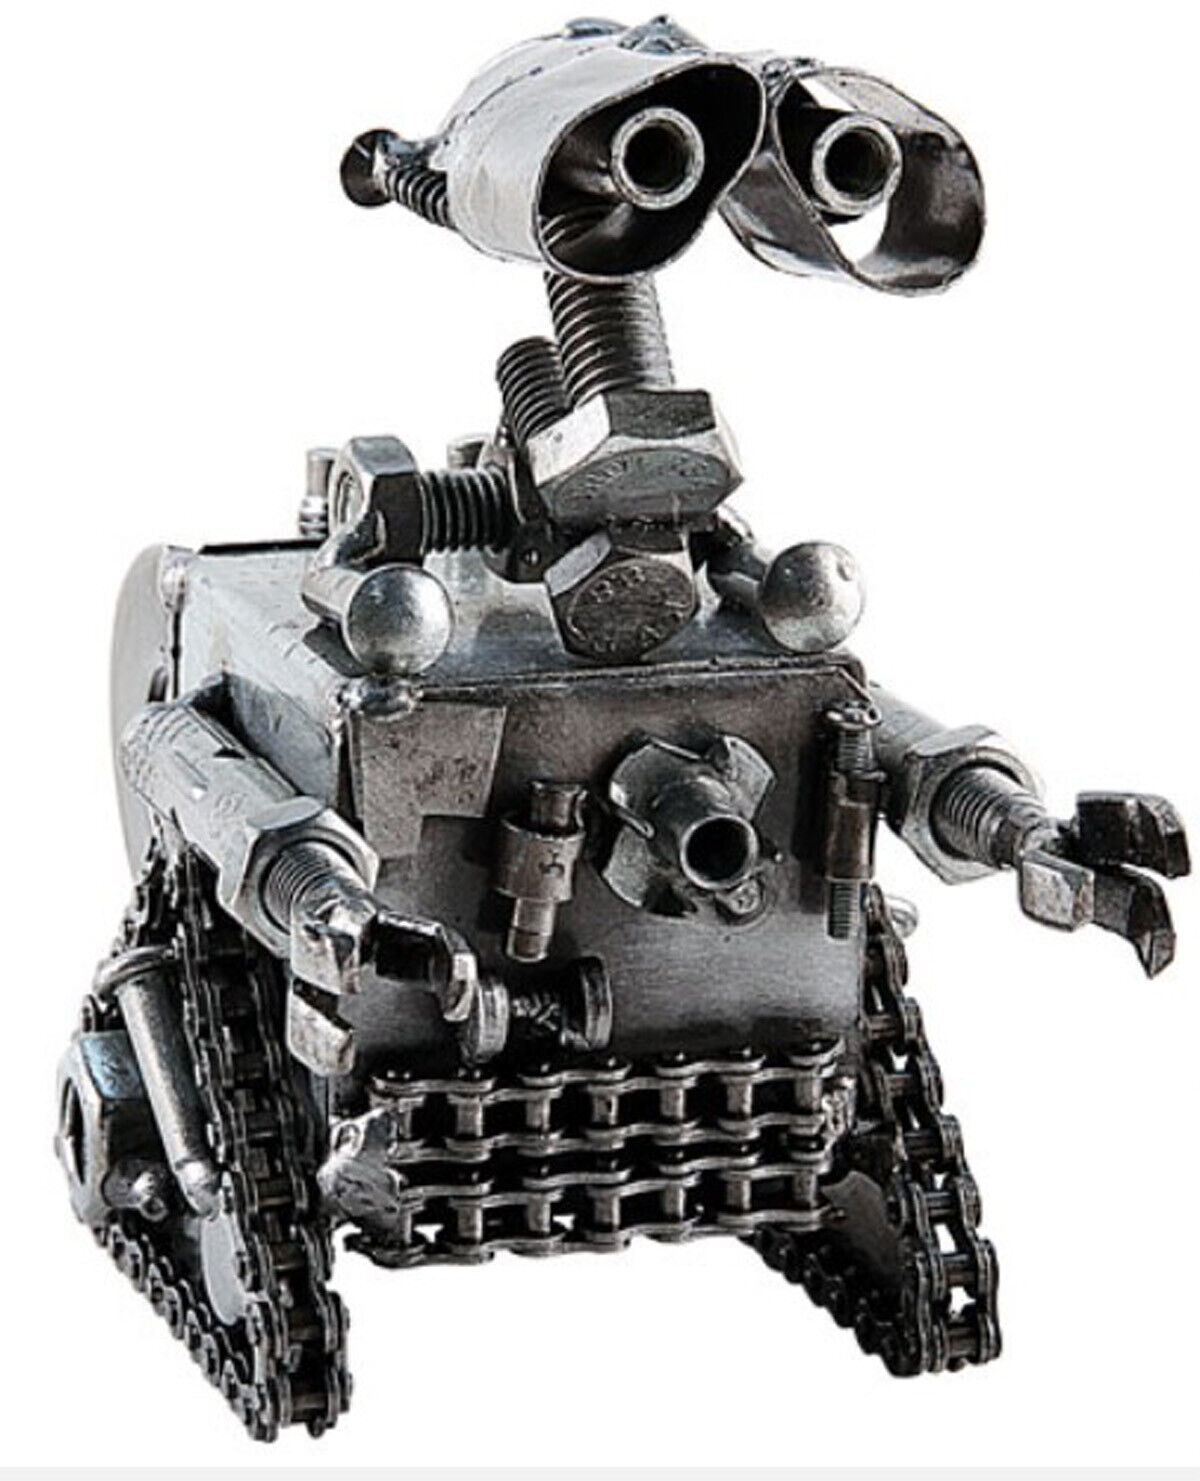 Wall-E Hand Crafted Recycled Metal  Art Sculpture Figurine  